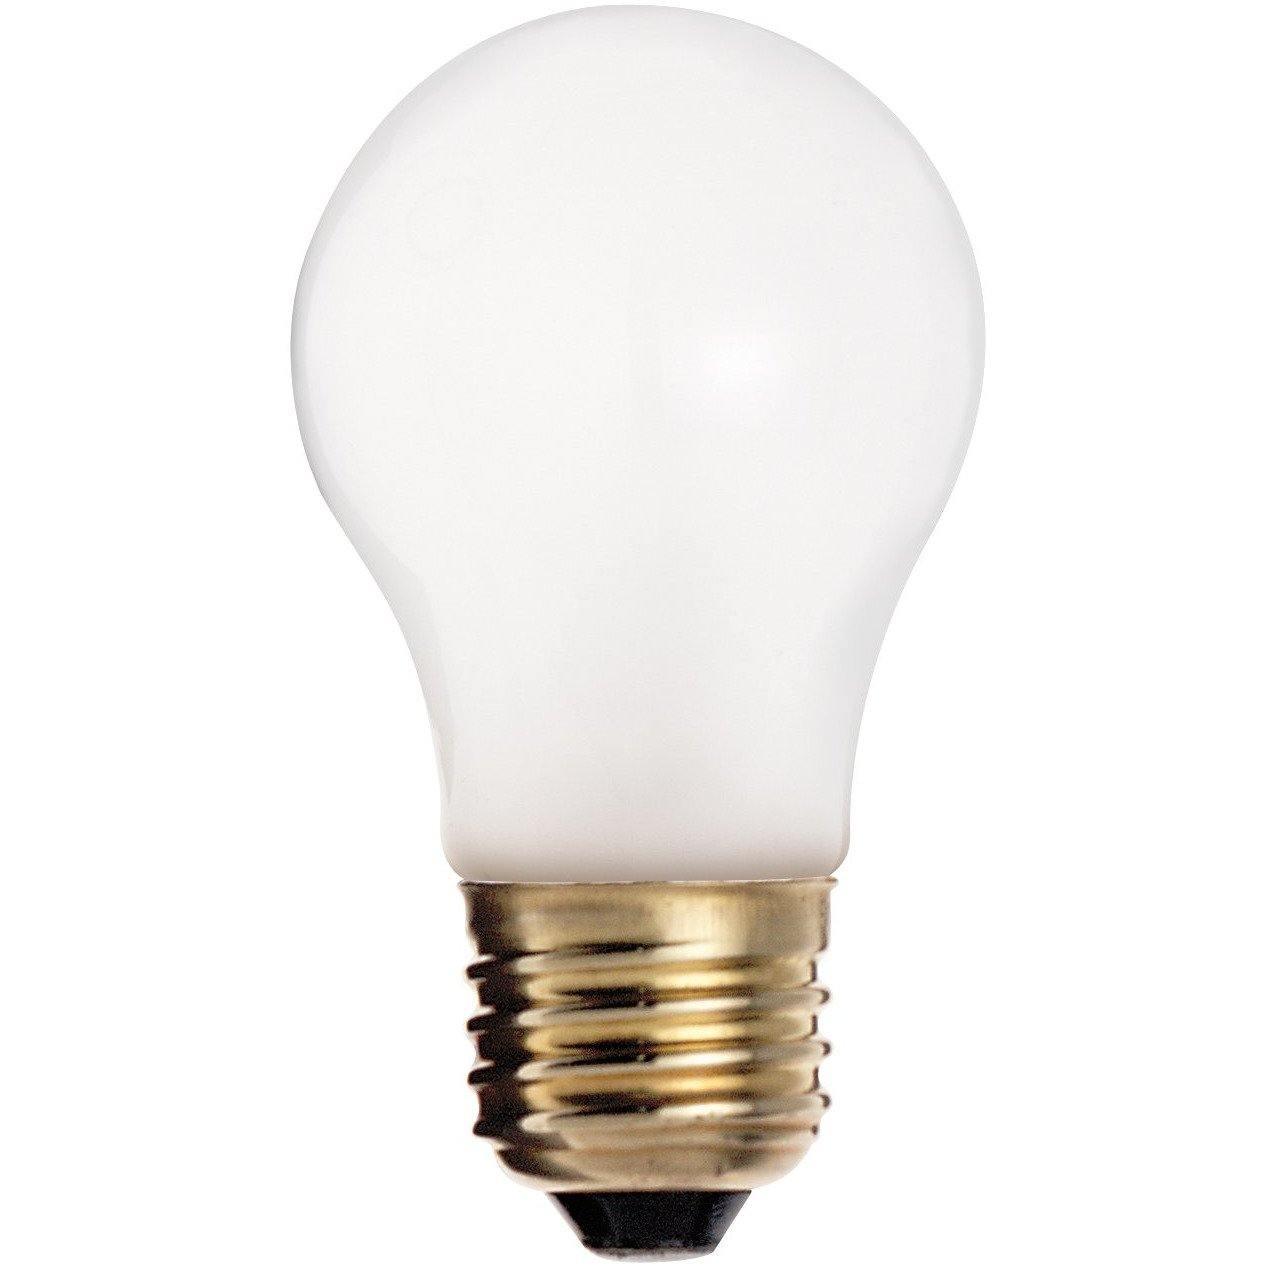 Satco Products - 40 Watt A15 Incandescent, Frost, Appliance Lamp, 2500 Average rated hours, 290/217 Lumens, Medium base, 130/120 Volt - S3721 | Montreal Lighting & Hardware